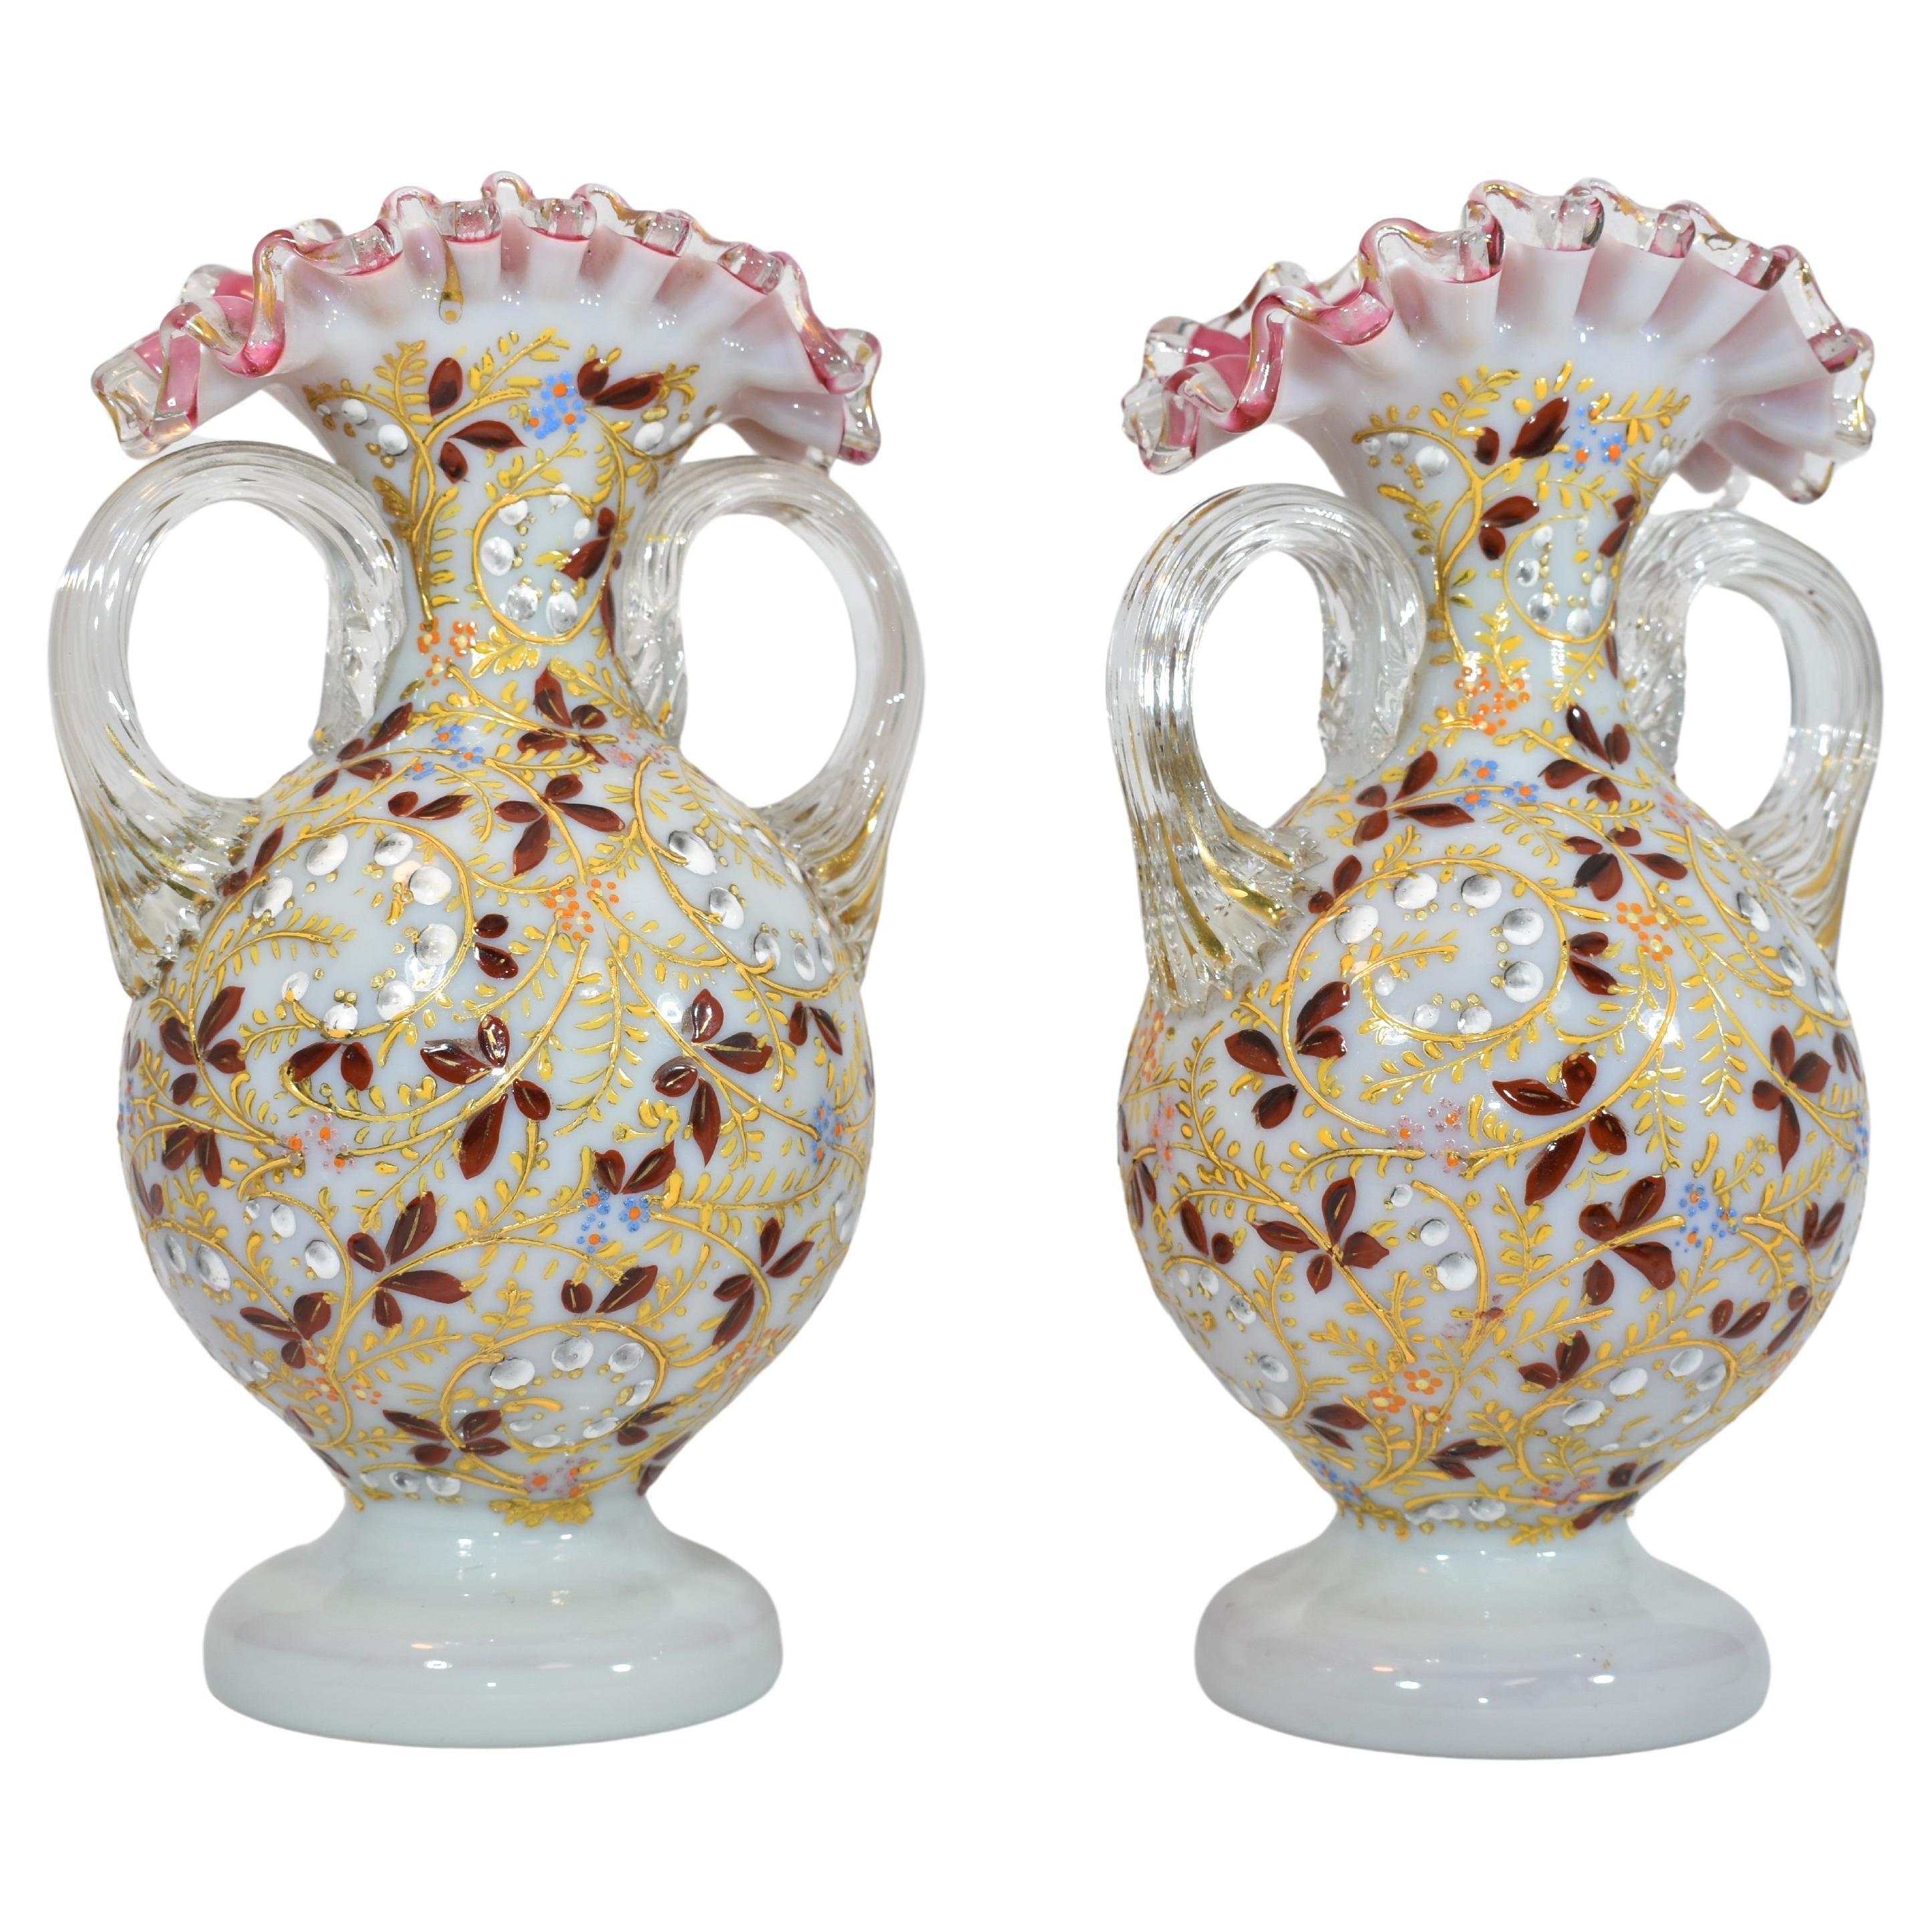 Antique Pair of Opaline Overlay Enamelled Glass Vases, Moser, 19th Century For Sale